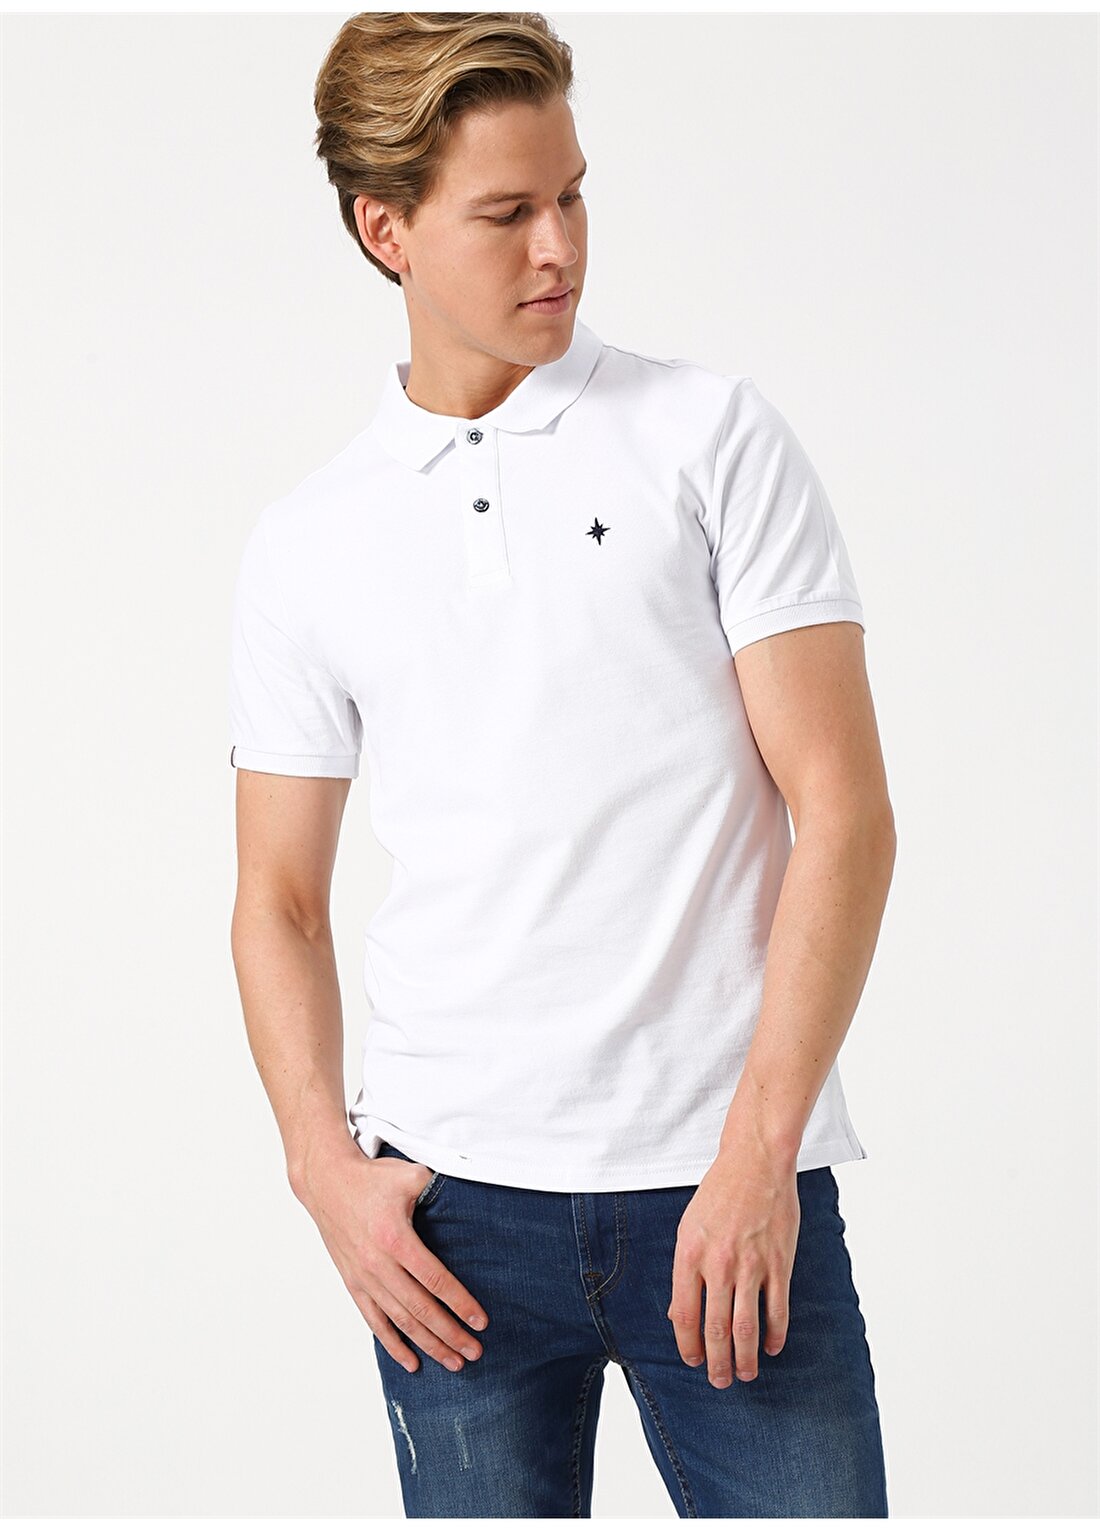 North Of Navy Beyaz Polo T-Shirt